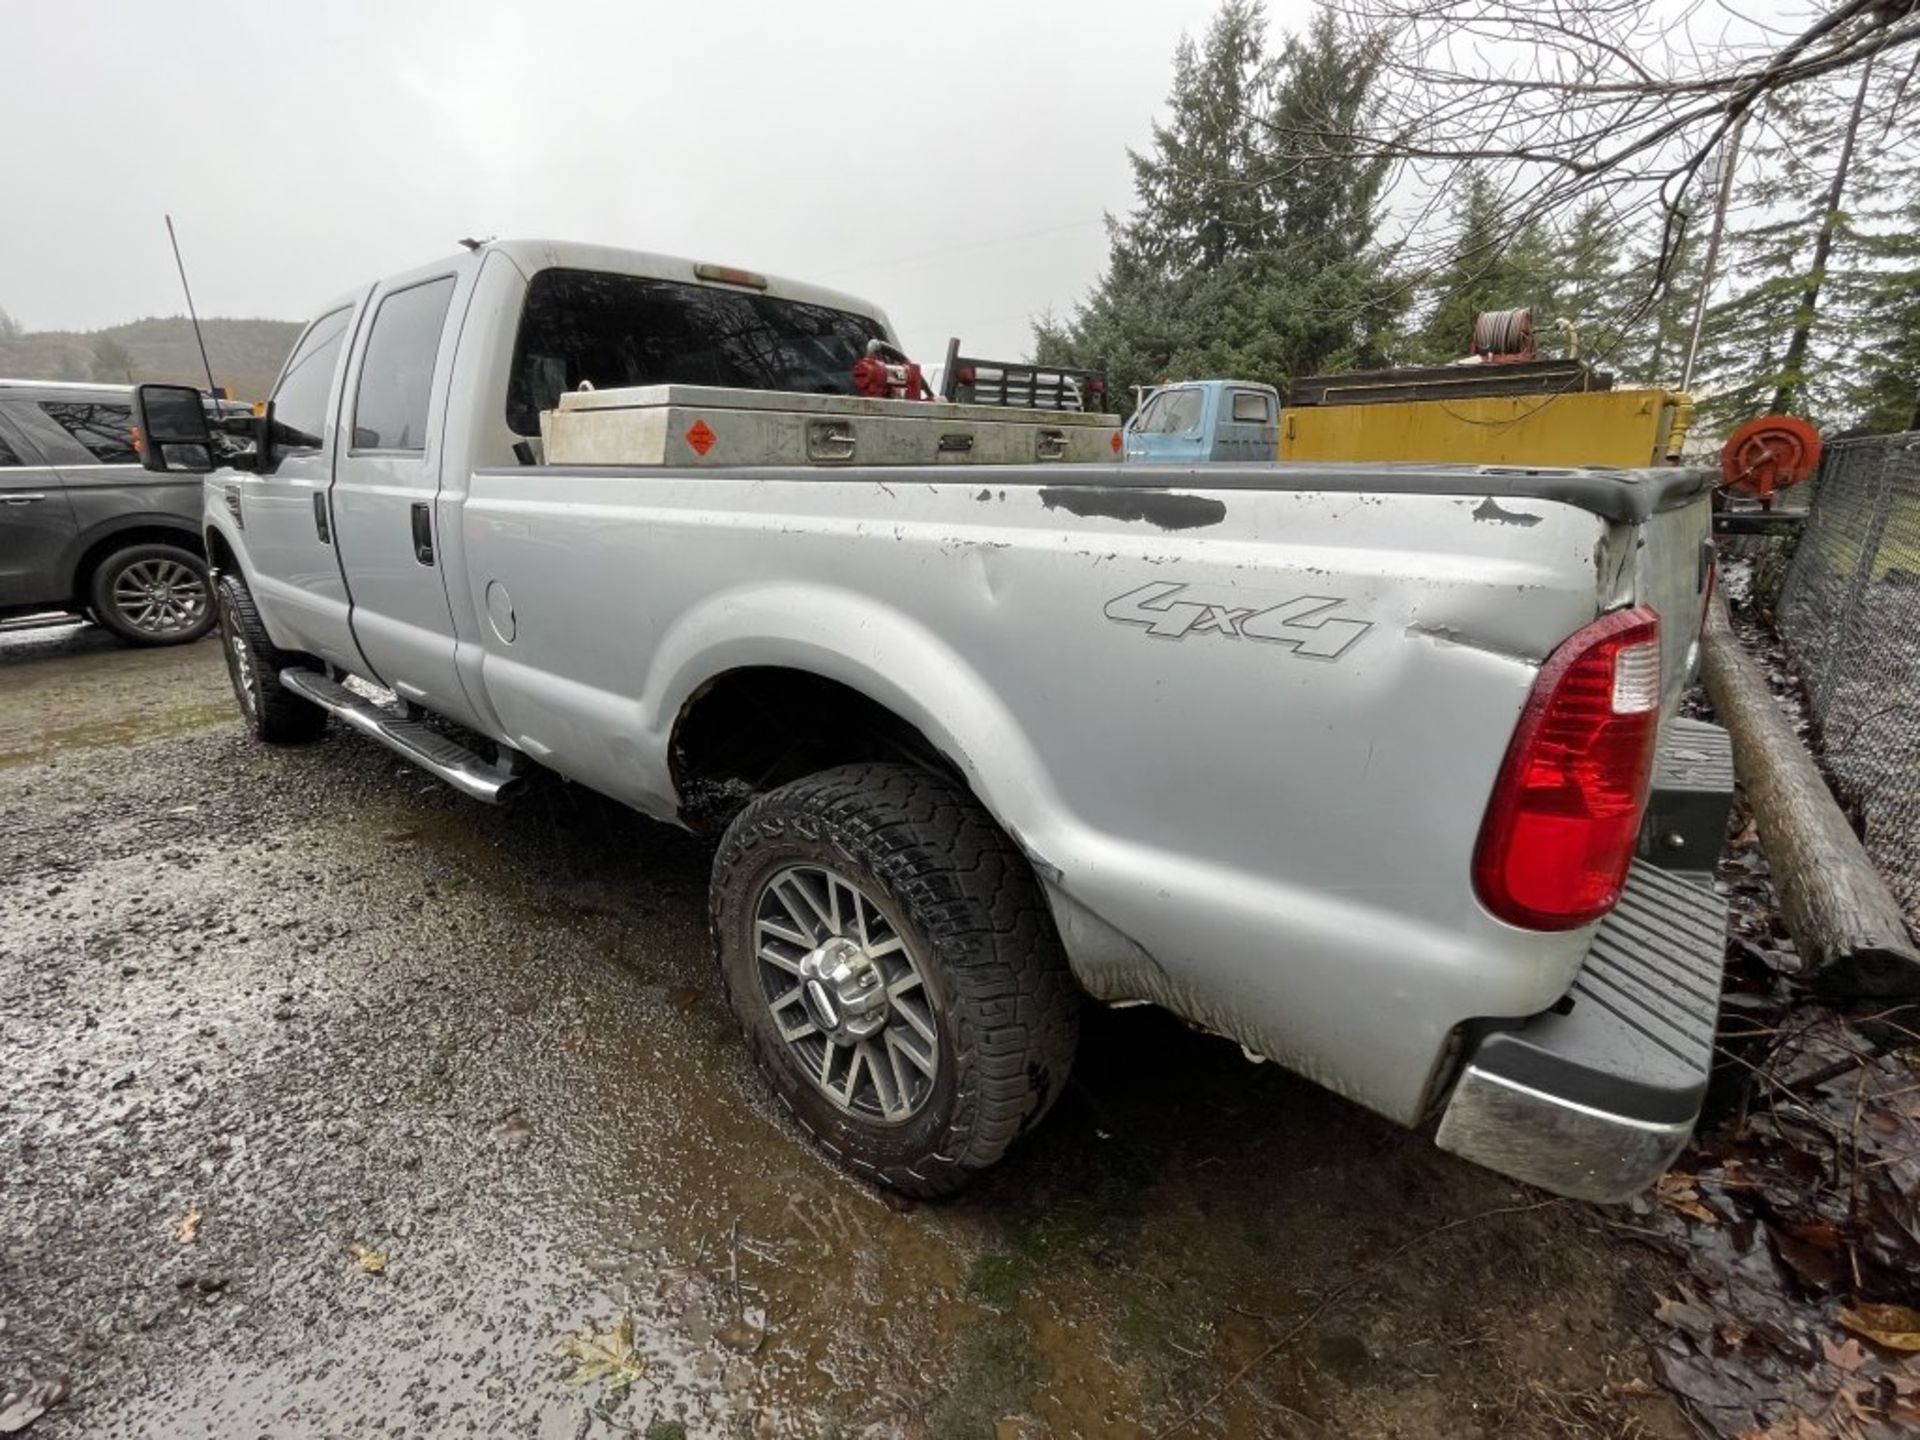 2008 Ford F350 XLT SD 4x4 Crew Cab Pickup - Image 4 of 16